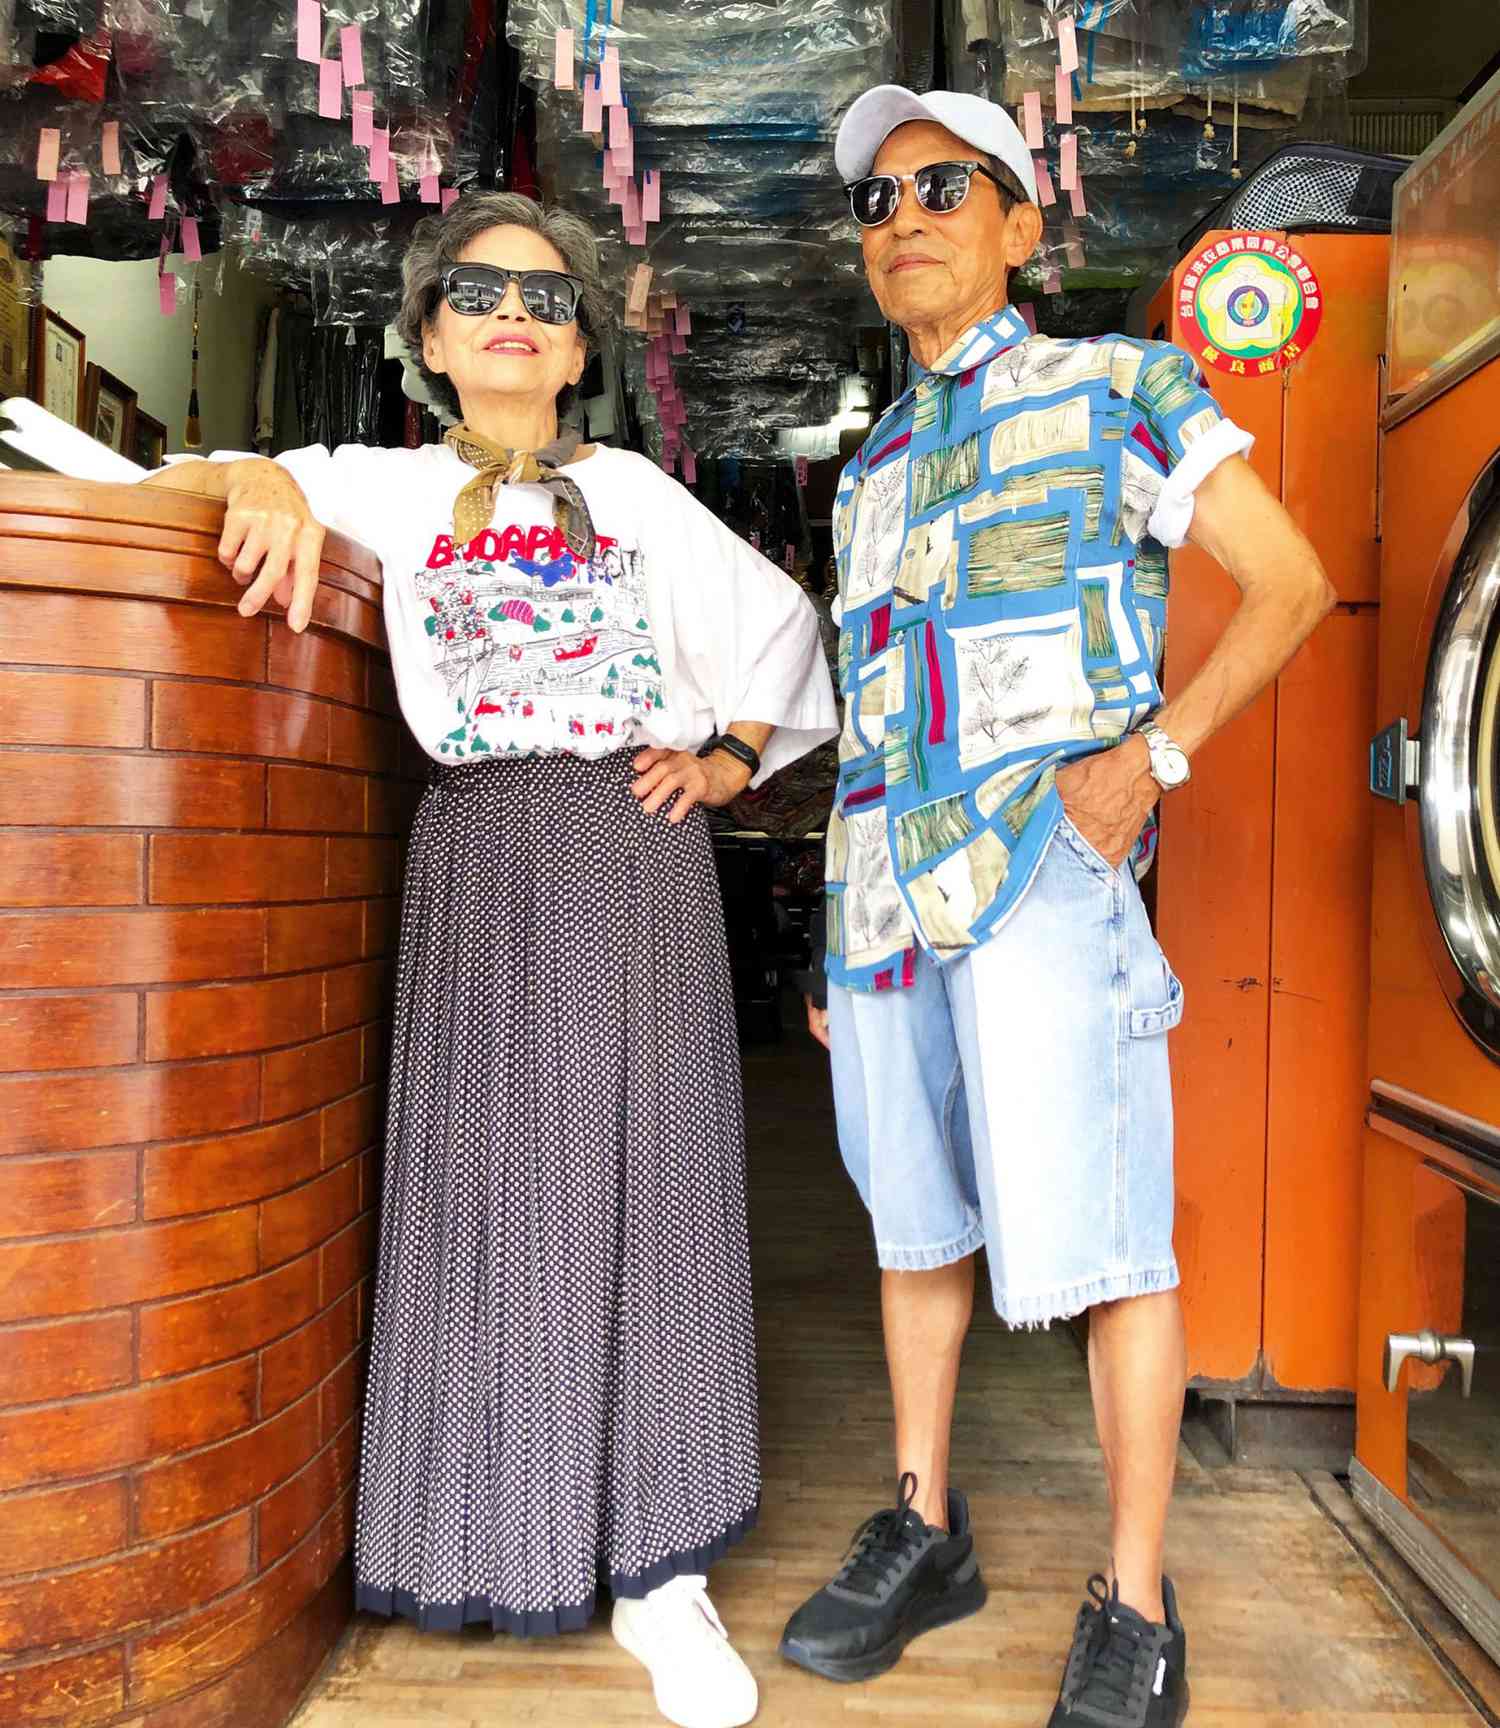 Taiwan elderly couple become IG celebrities by modeling leftover clothes in laundry, Taichung - 14 Jun 2020